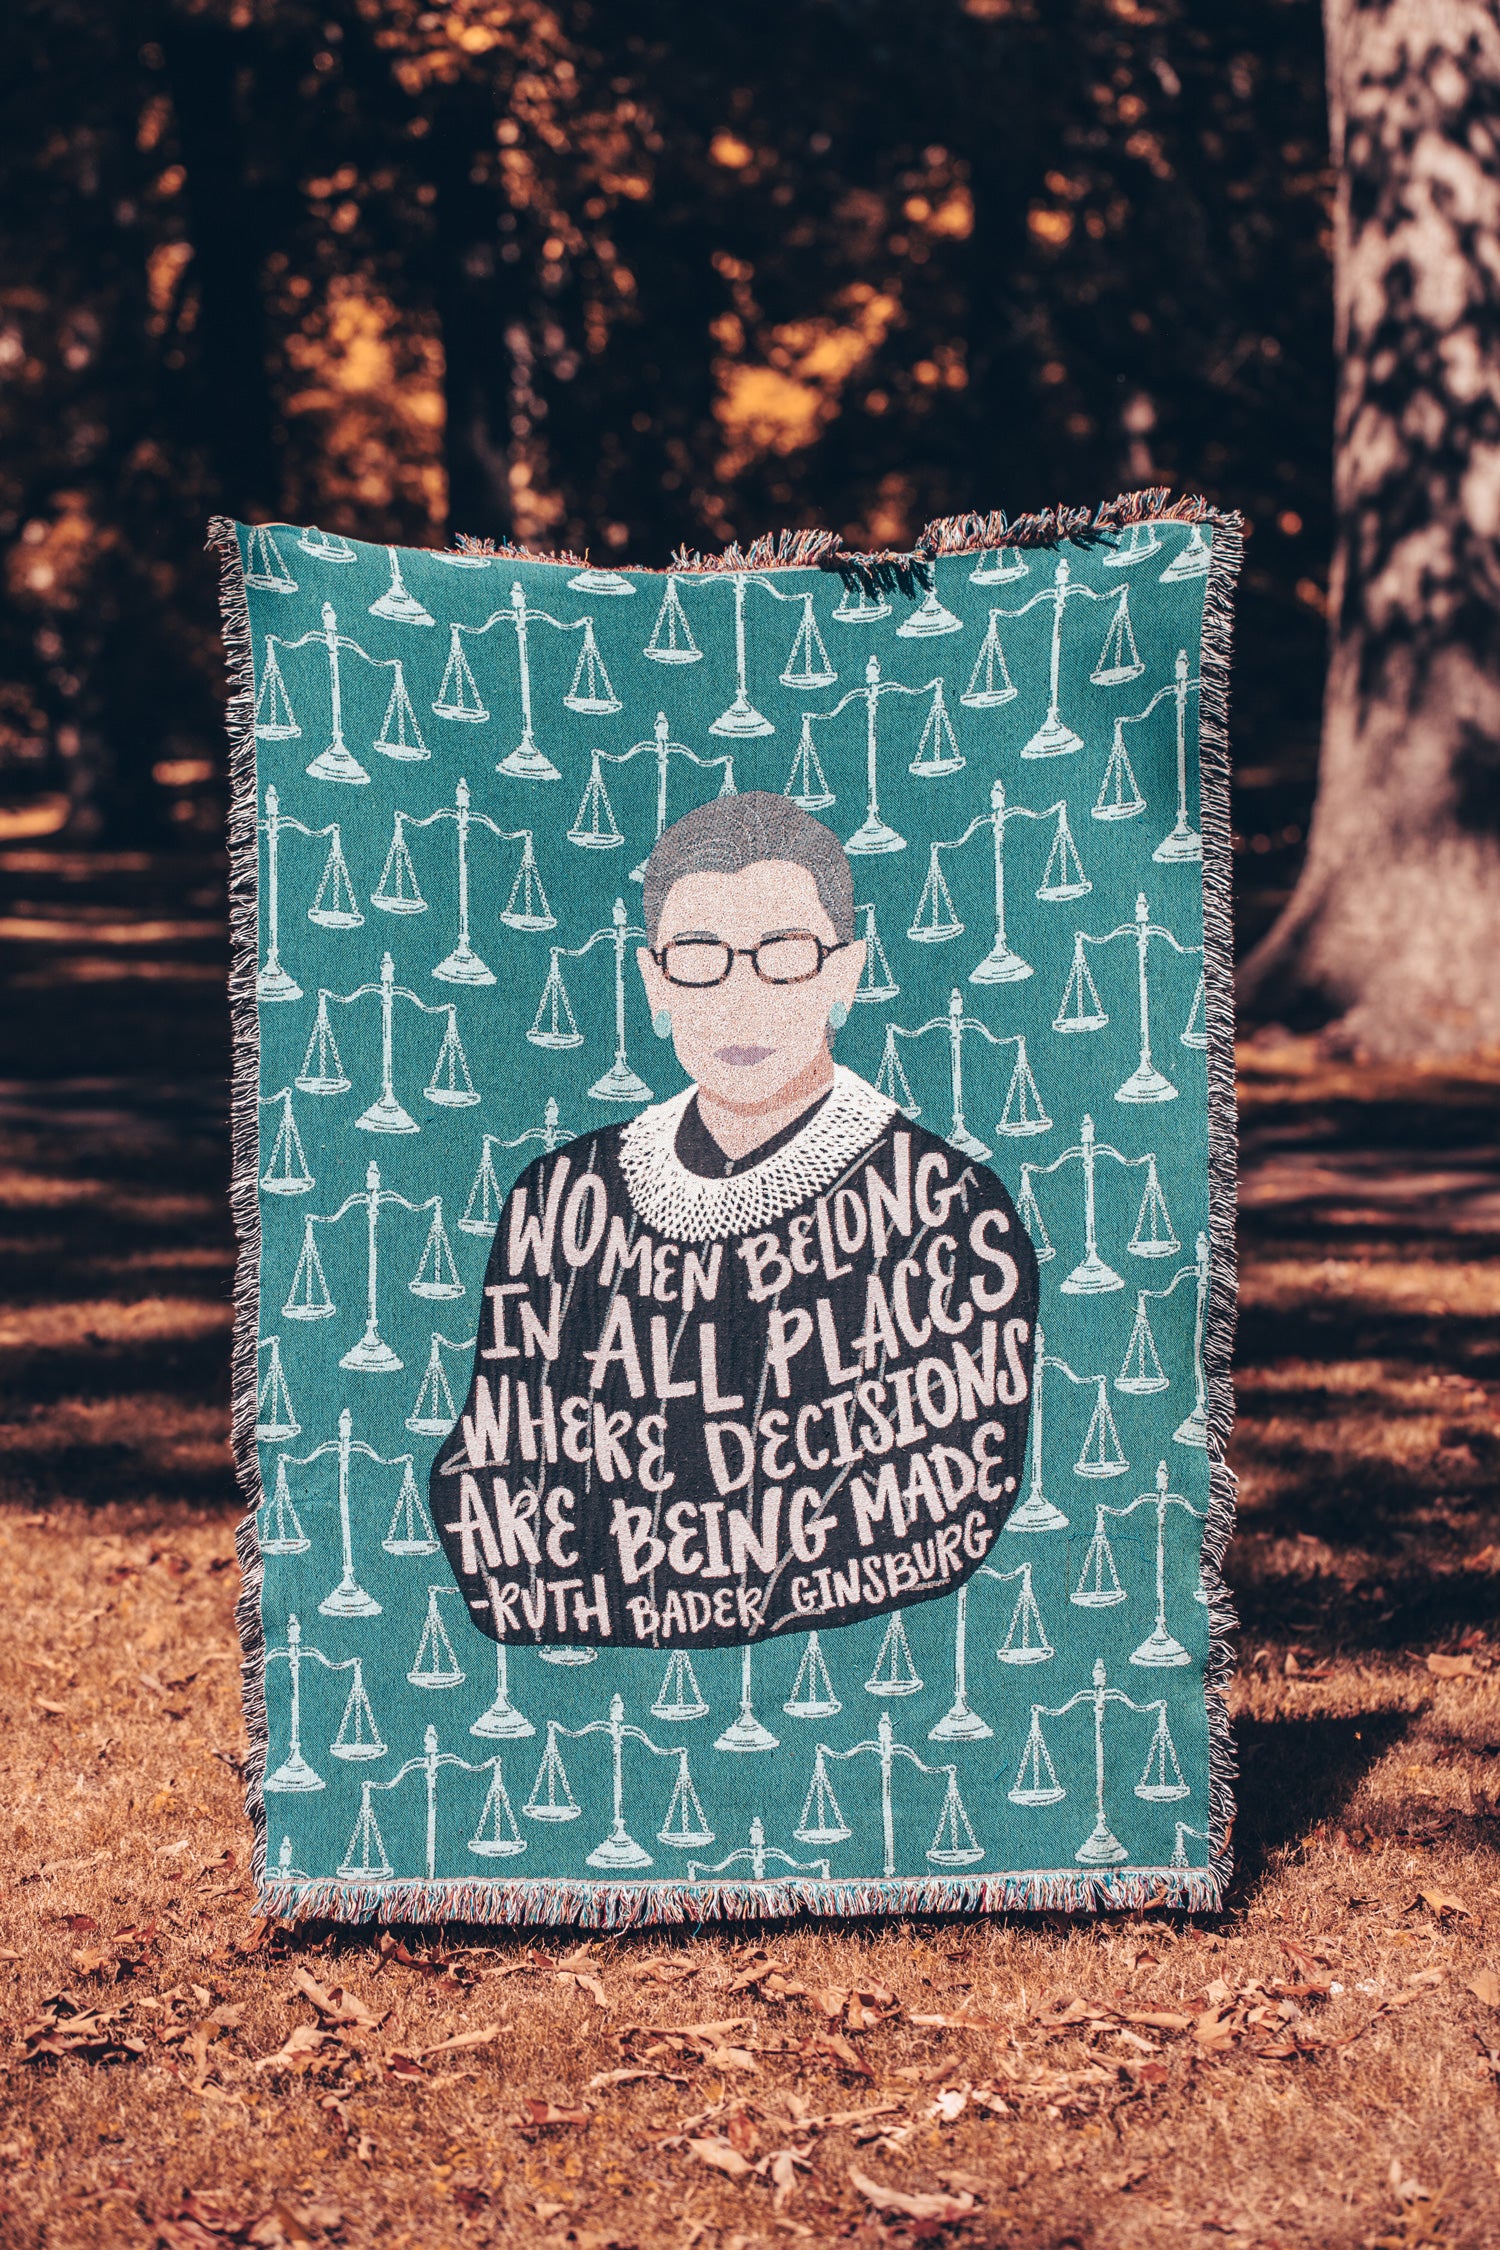 Fringe edged woven blanket tapestry featuring illustration of Ruth Bader Ginsburg with quote "Women belong in all places where decisions are being made." Includes pattern of justice scales on teal background. Blanket pictured being held up to full size in park during fall.